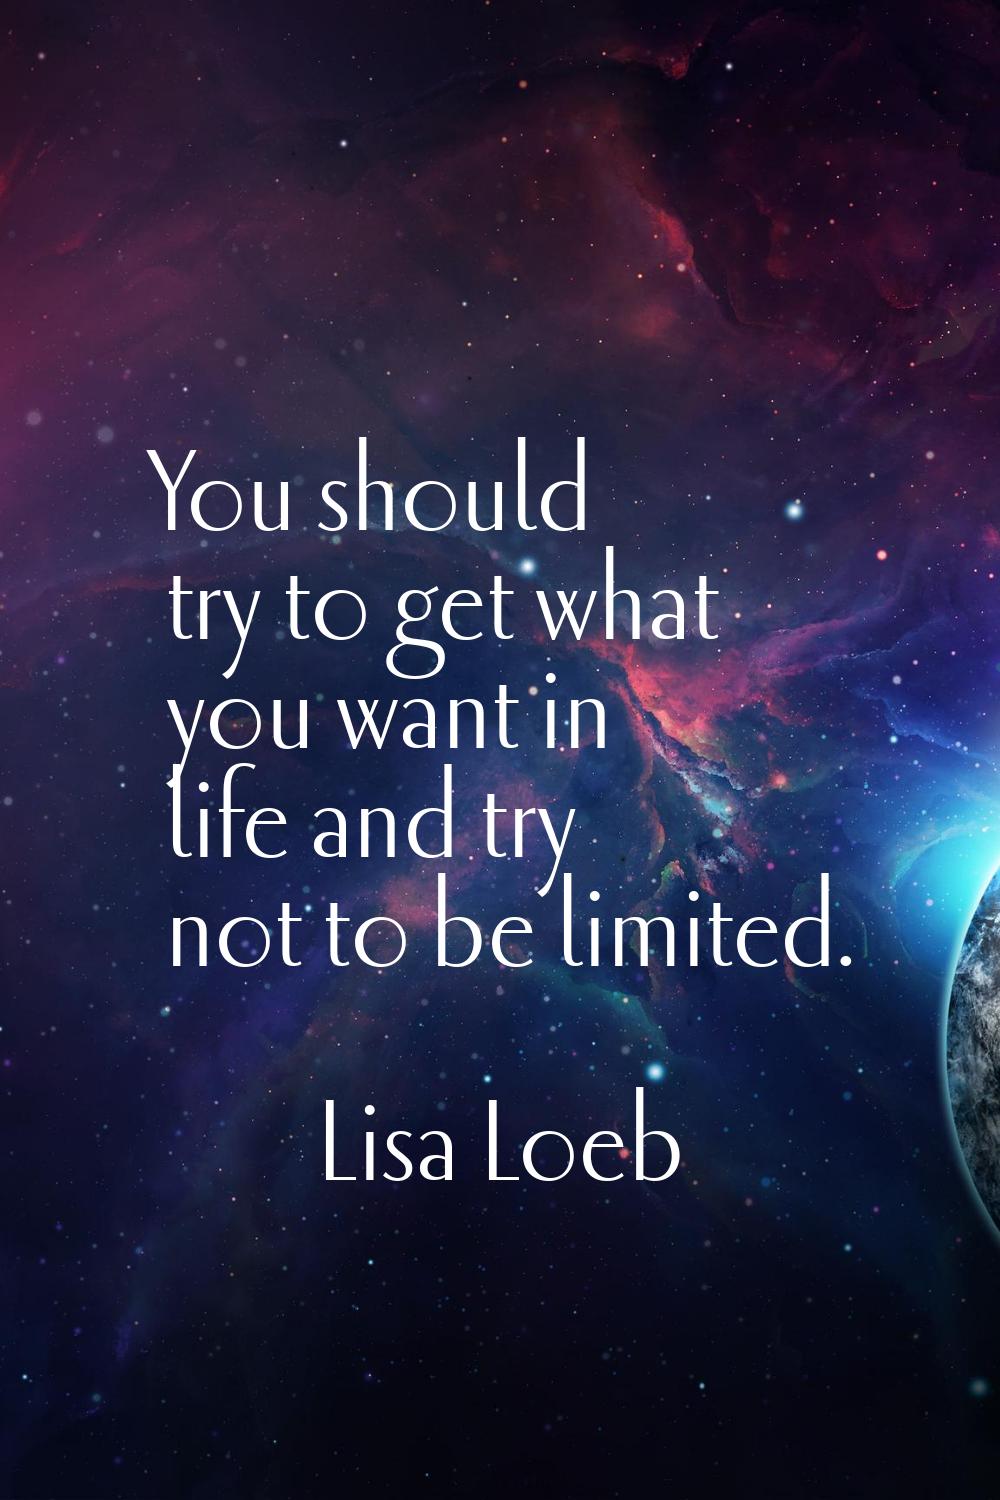 You should try to get what you want in life and try not to be limited.